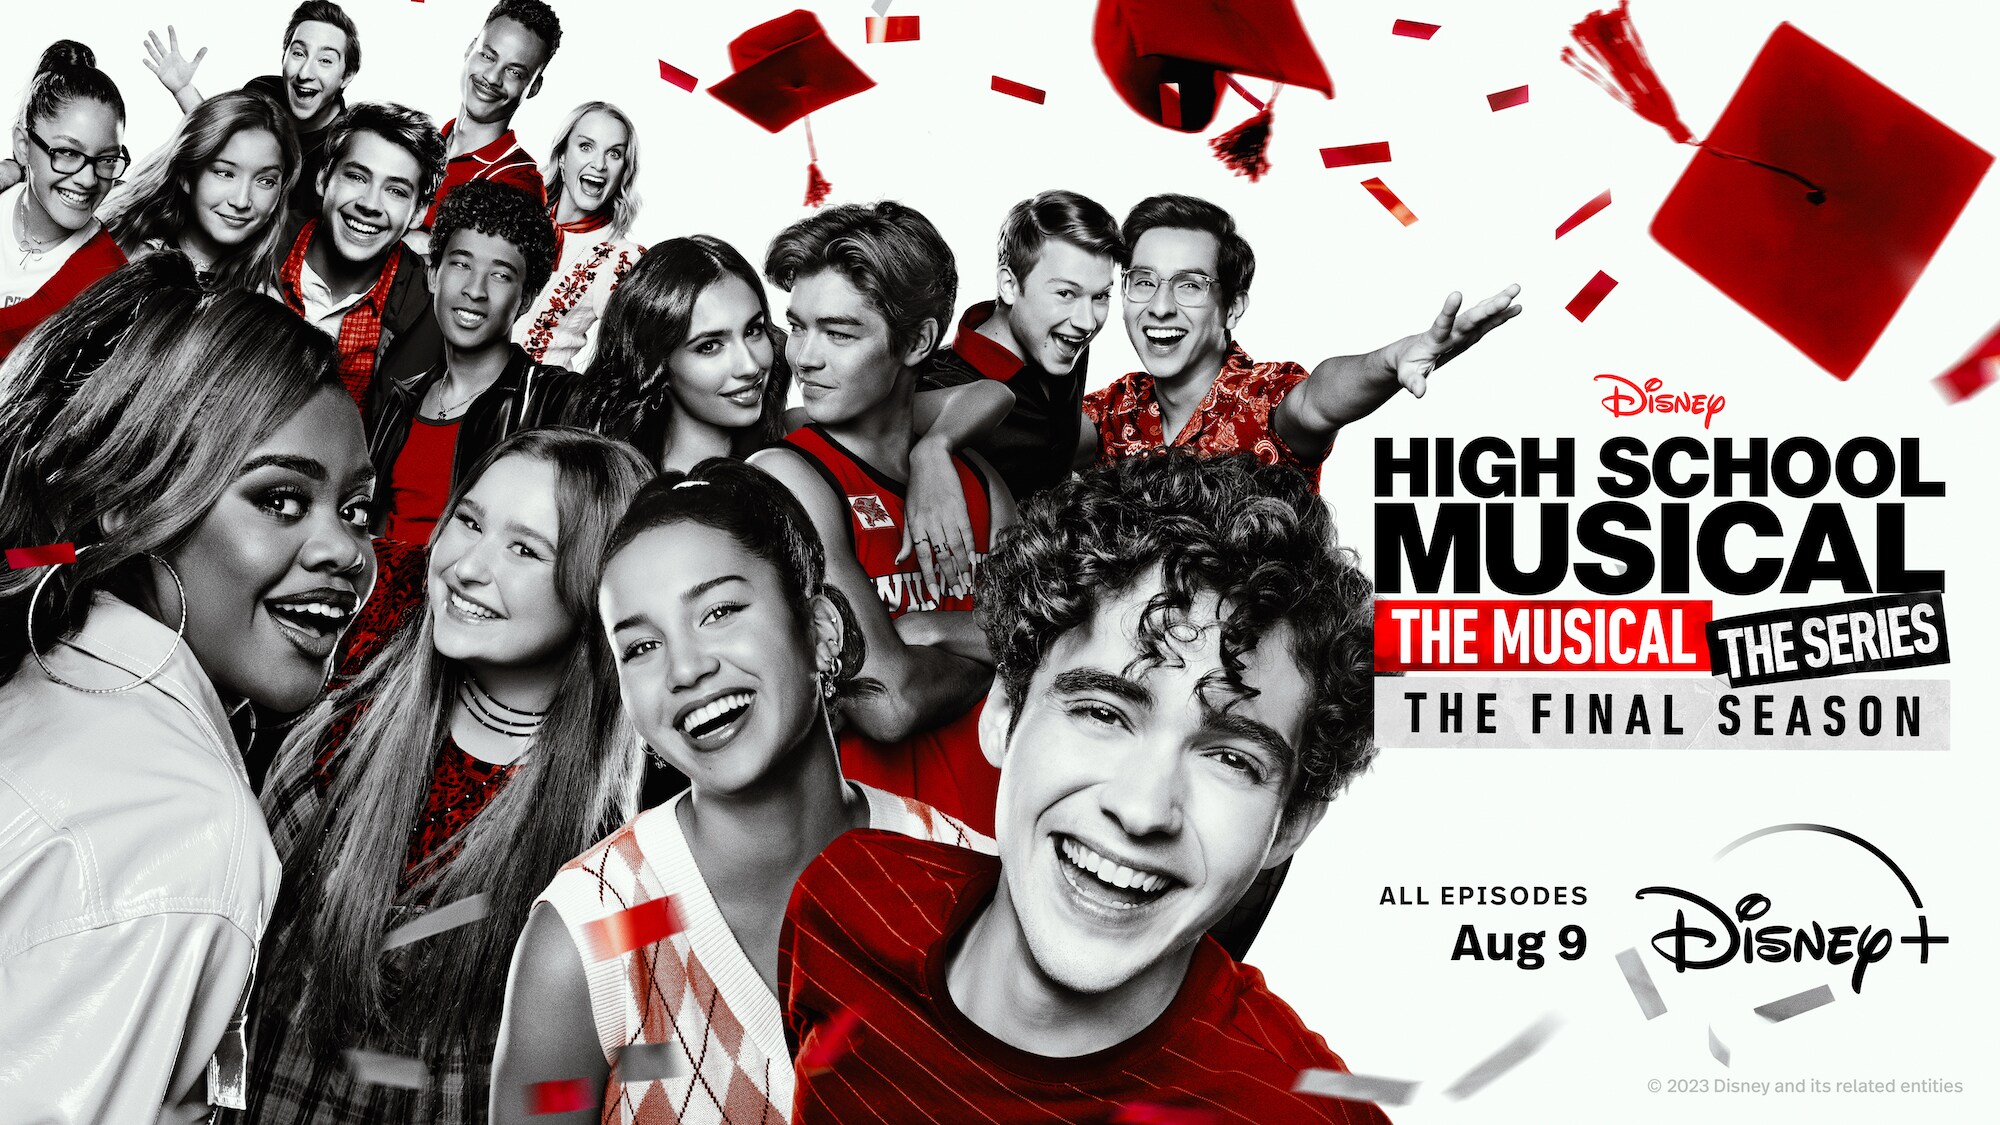 It's Now Or Never! Disney+ Reveals Official Trailer Of “High School  Musical: The Musical: The Series” Season Four Ahead Of Highly Anticipated  August 9 Premiere | Disney Plus Press